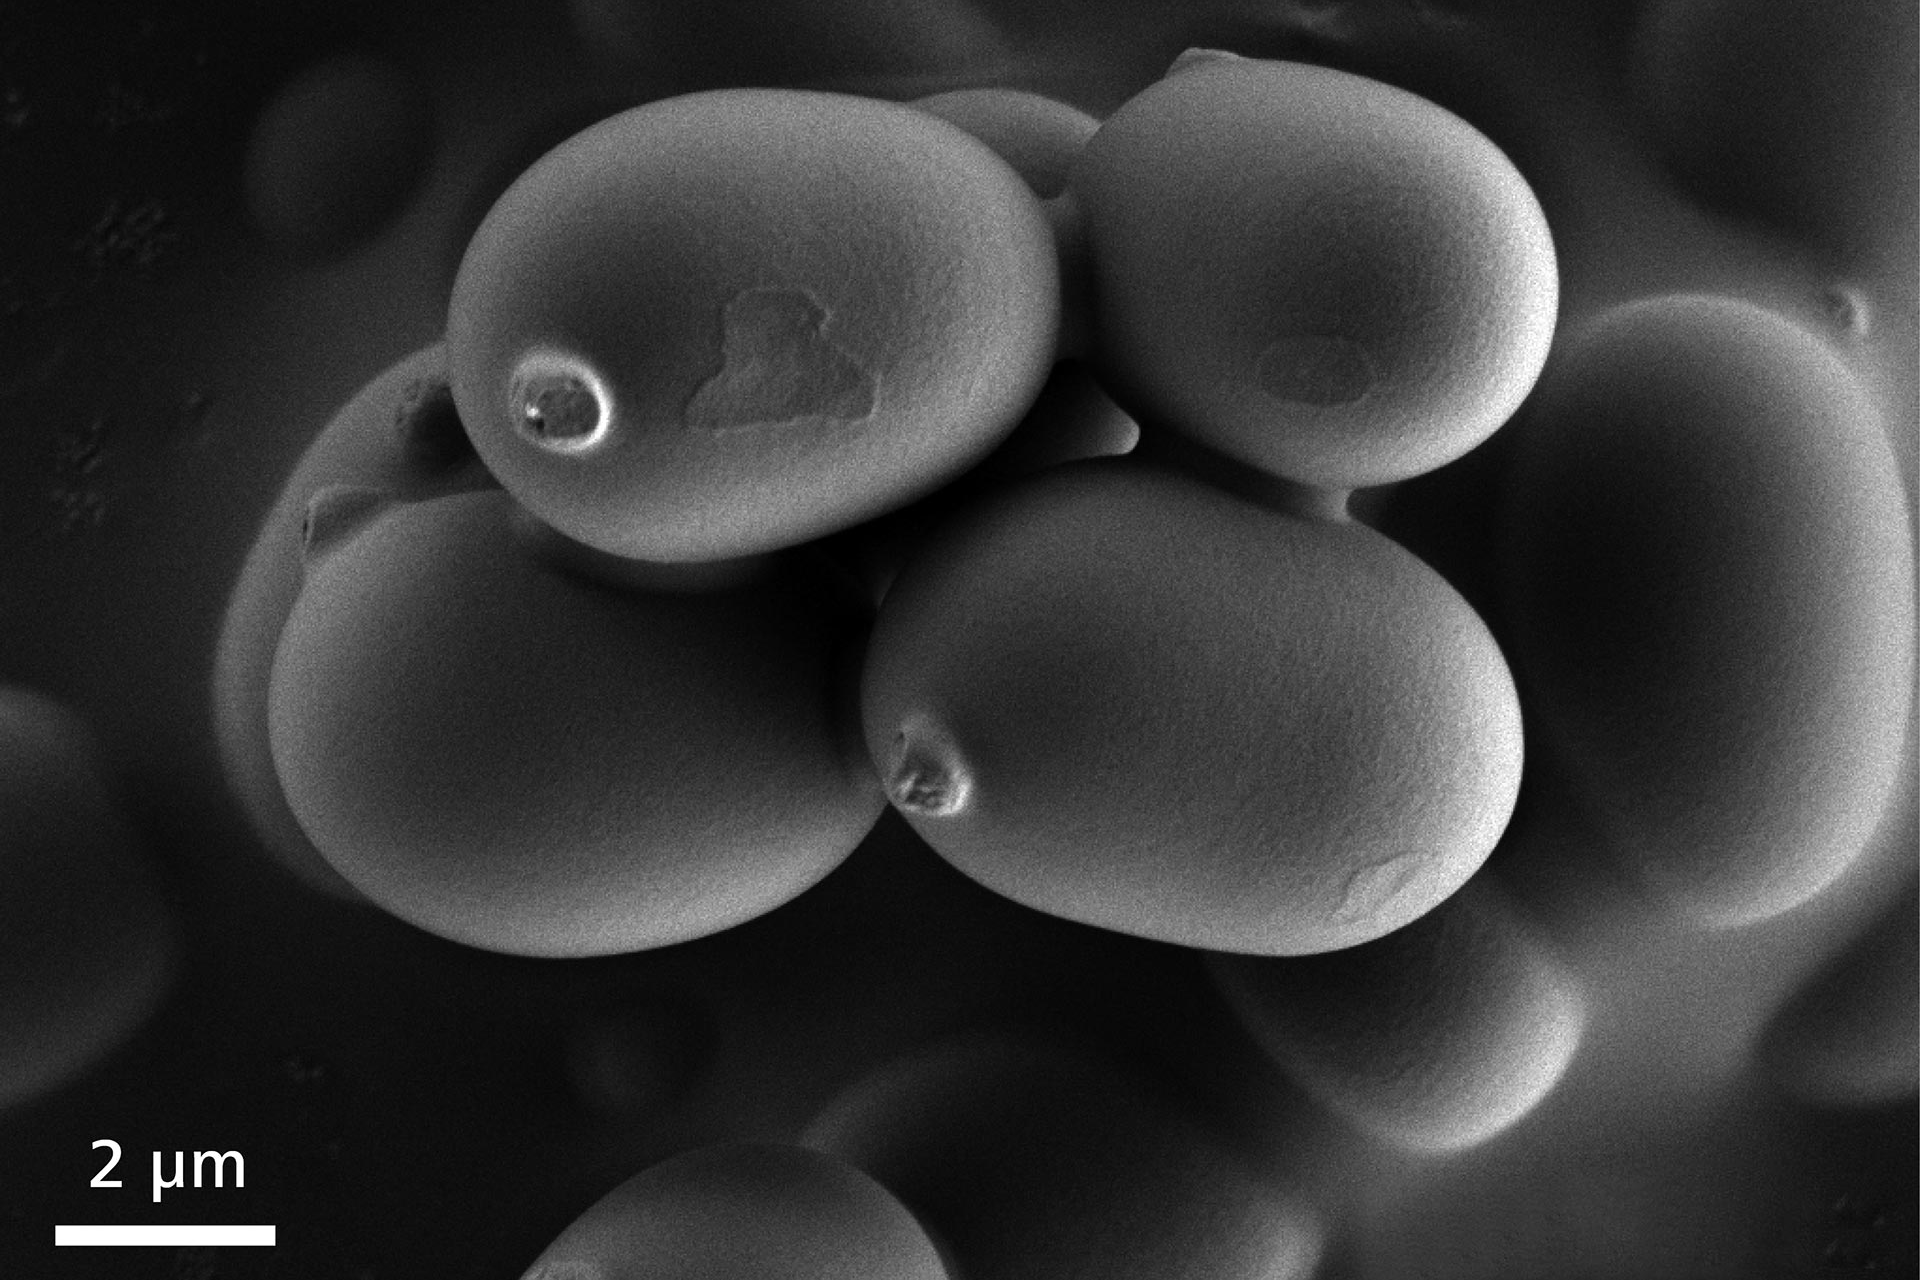 Mushroom spores imaged at 1 kV at high vacuum. These delicate, fragile structures can be imaged easily with Sigma 500 at low voltage.